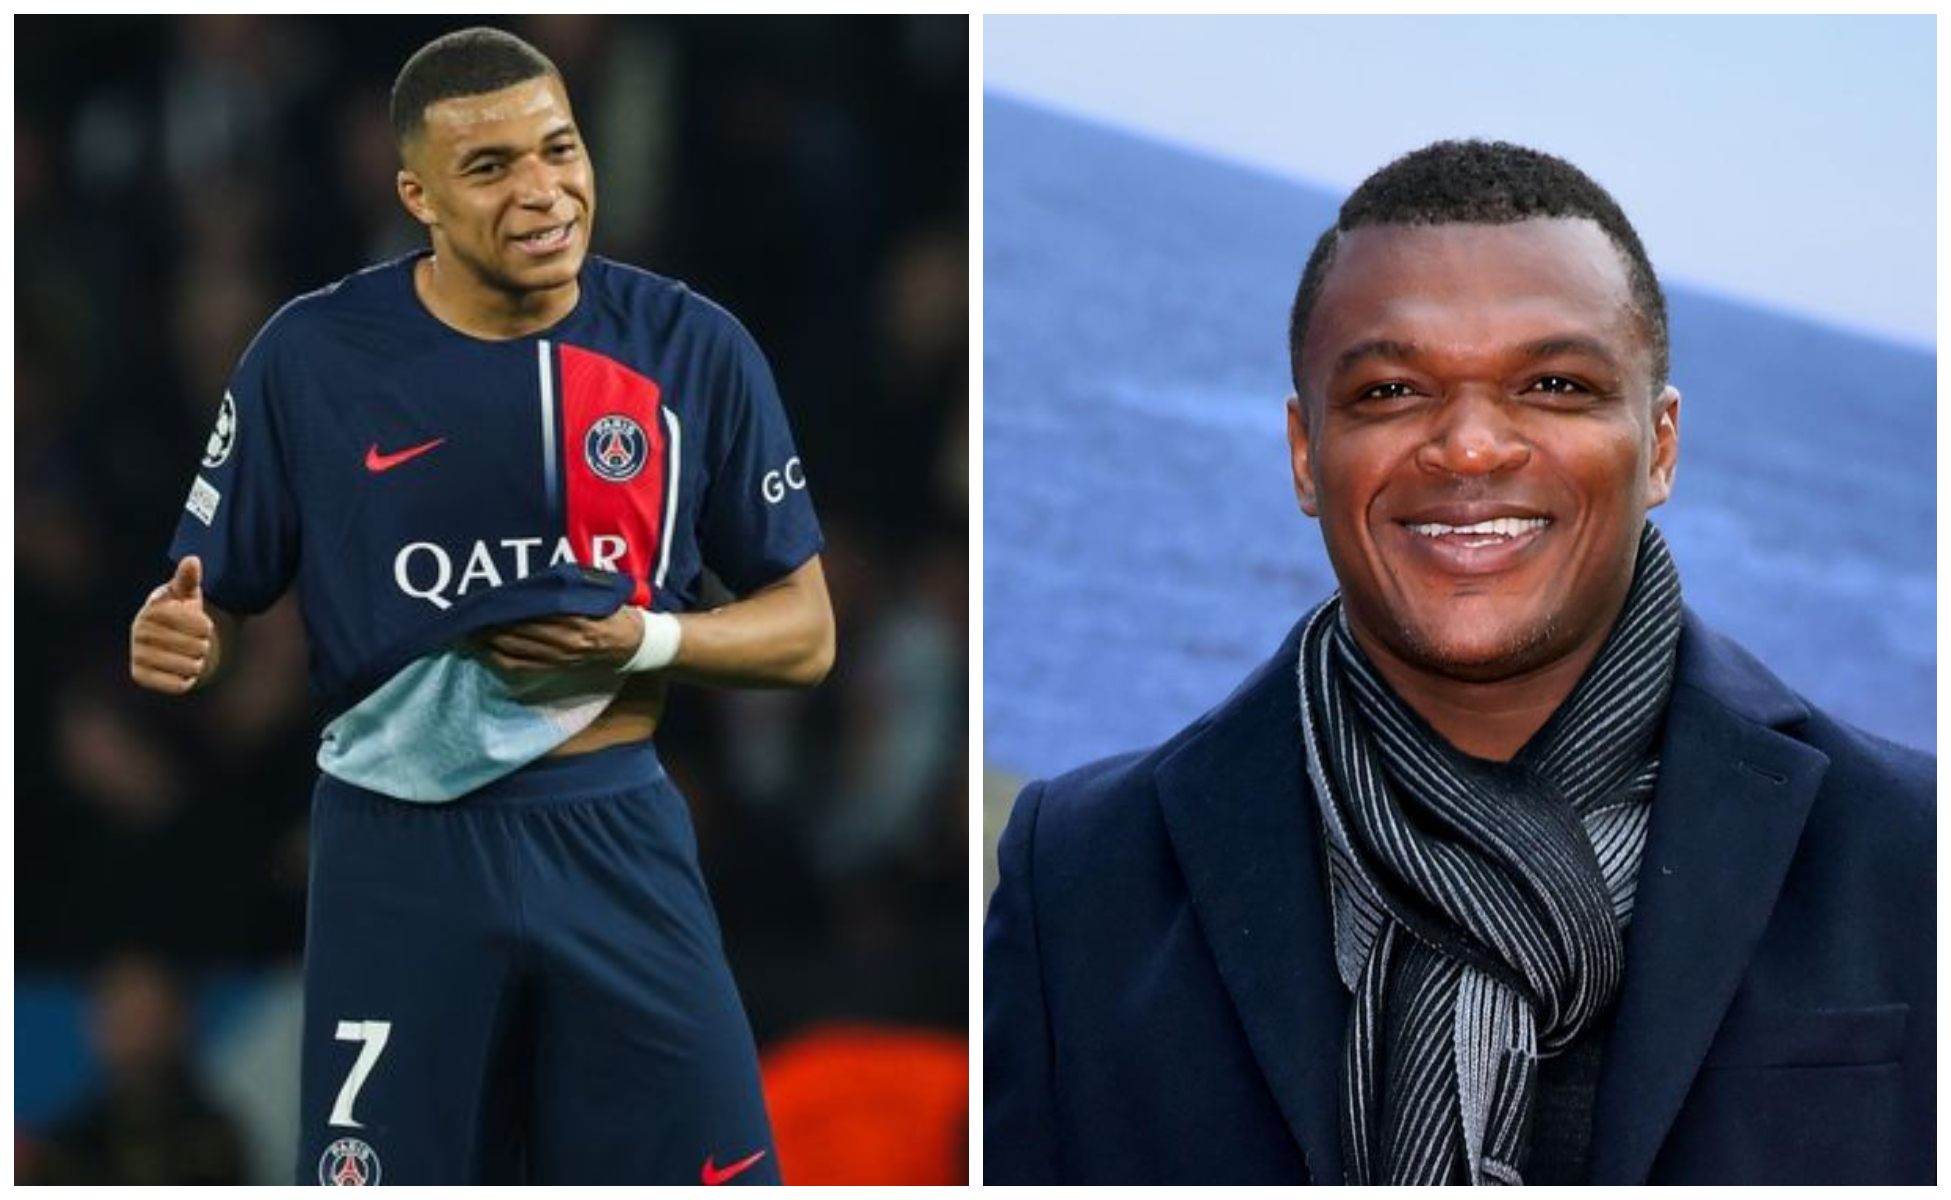 Marcel Desailly advises Mbappe to reject Real Madrid for €350m Saudi offer